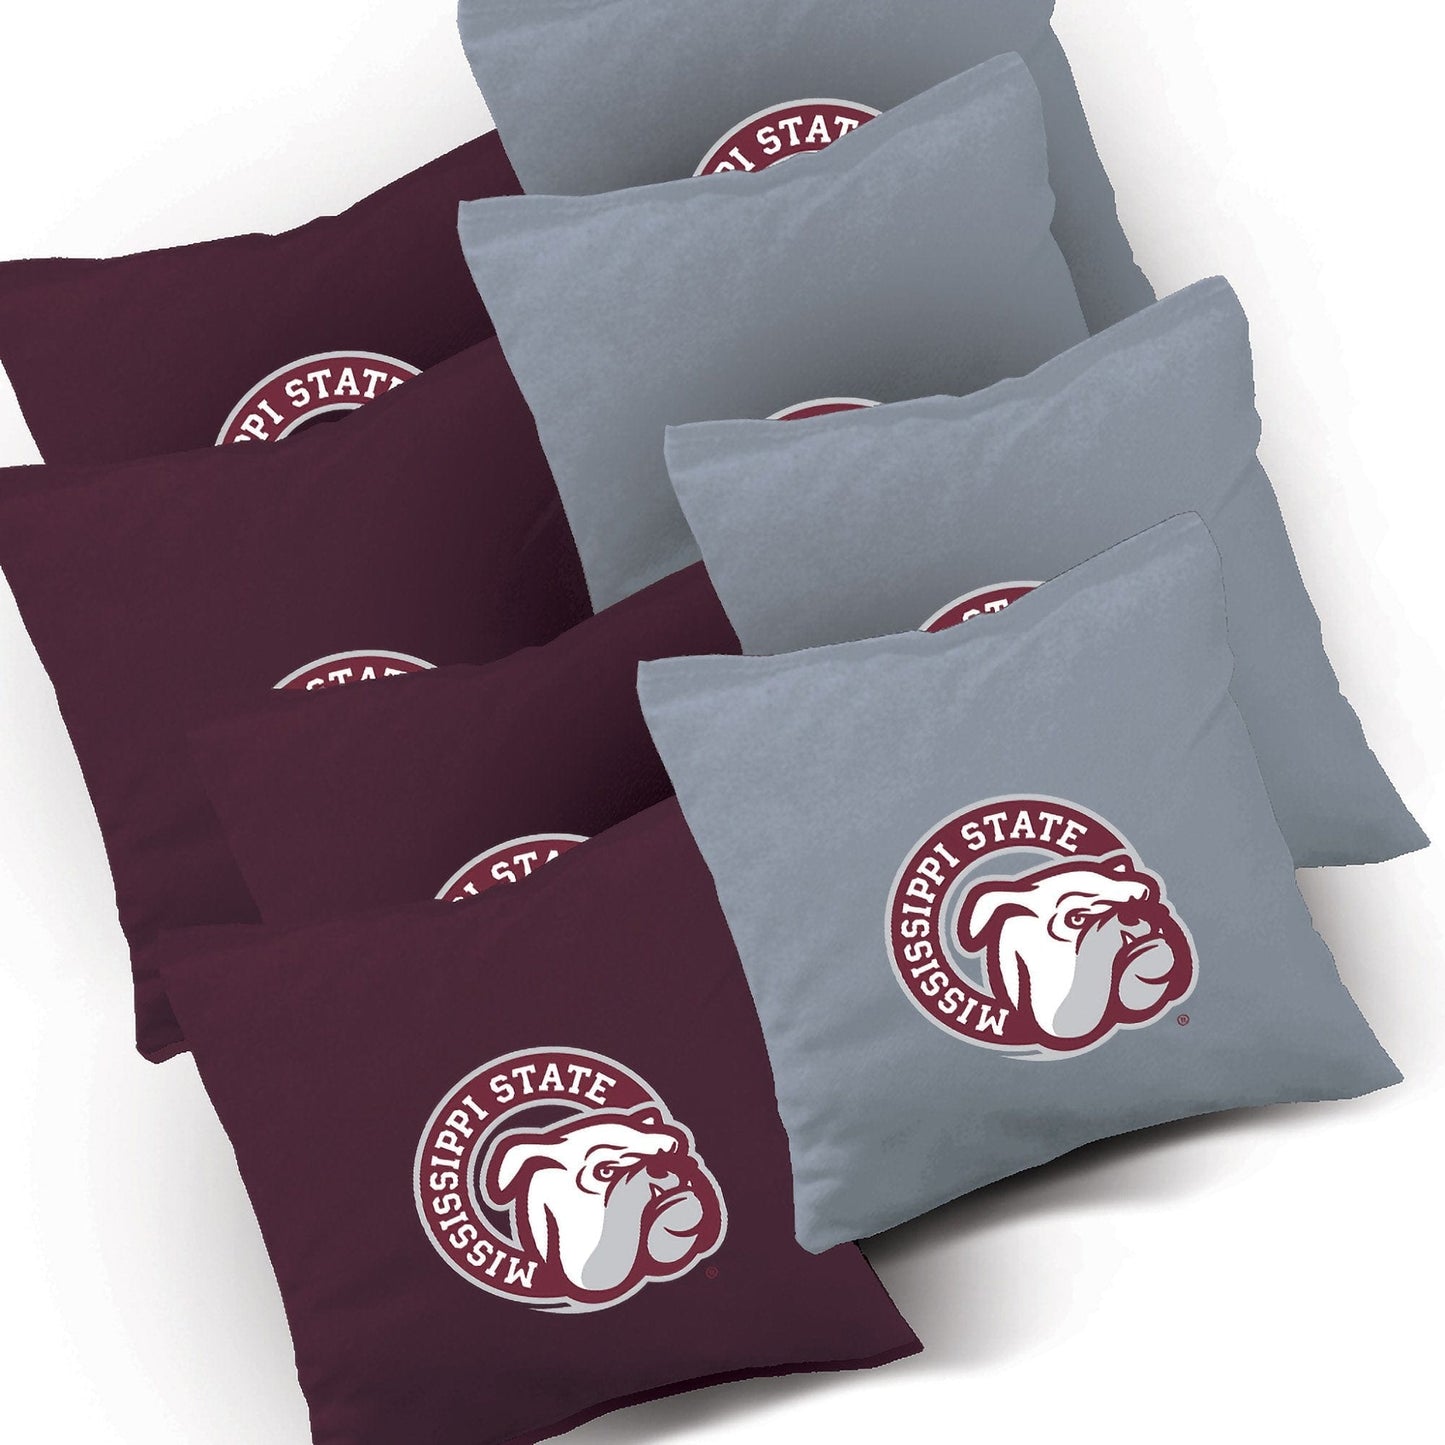 Mississippi State Bulldogs Distressed team logo bags